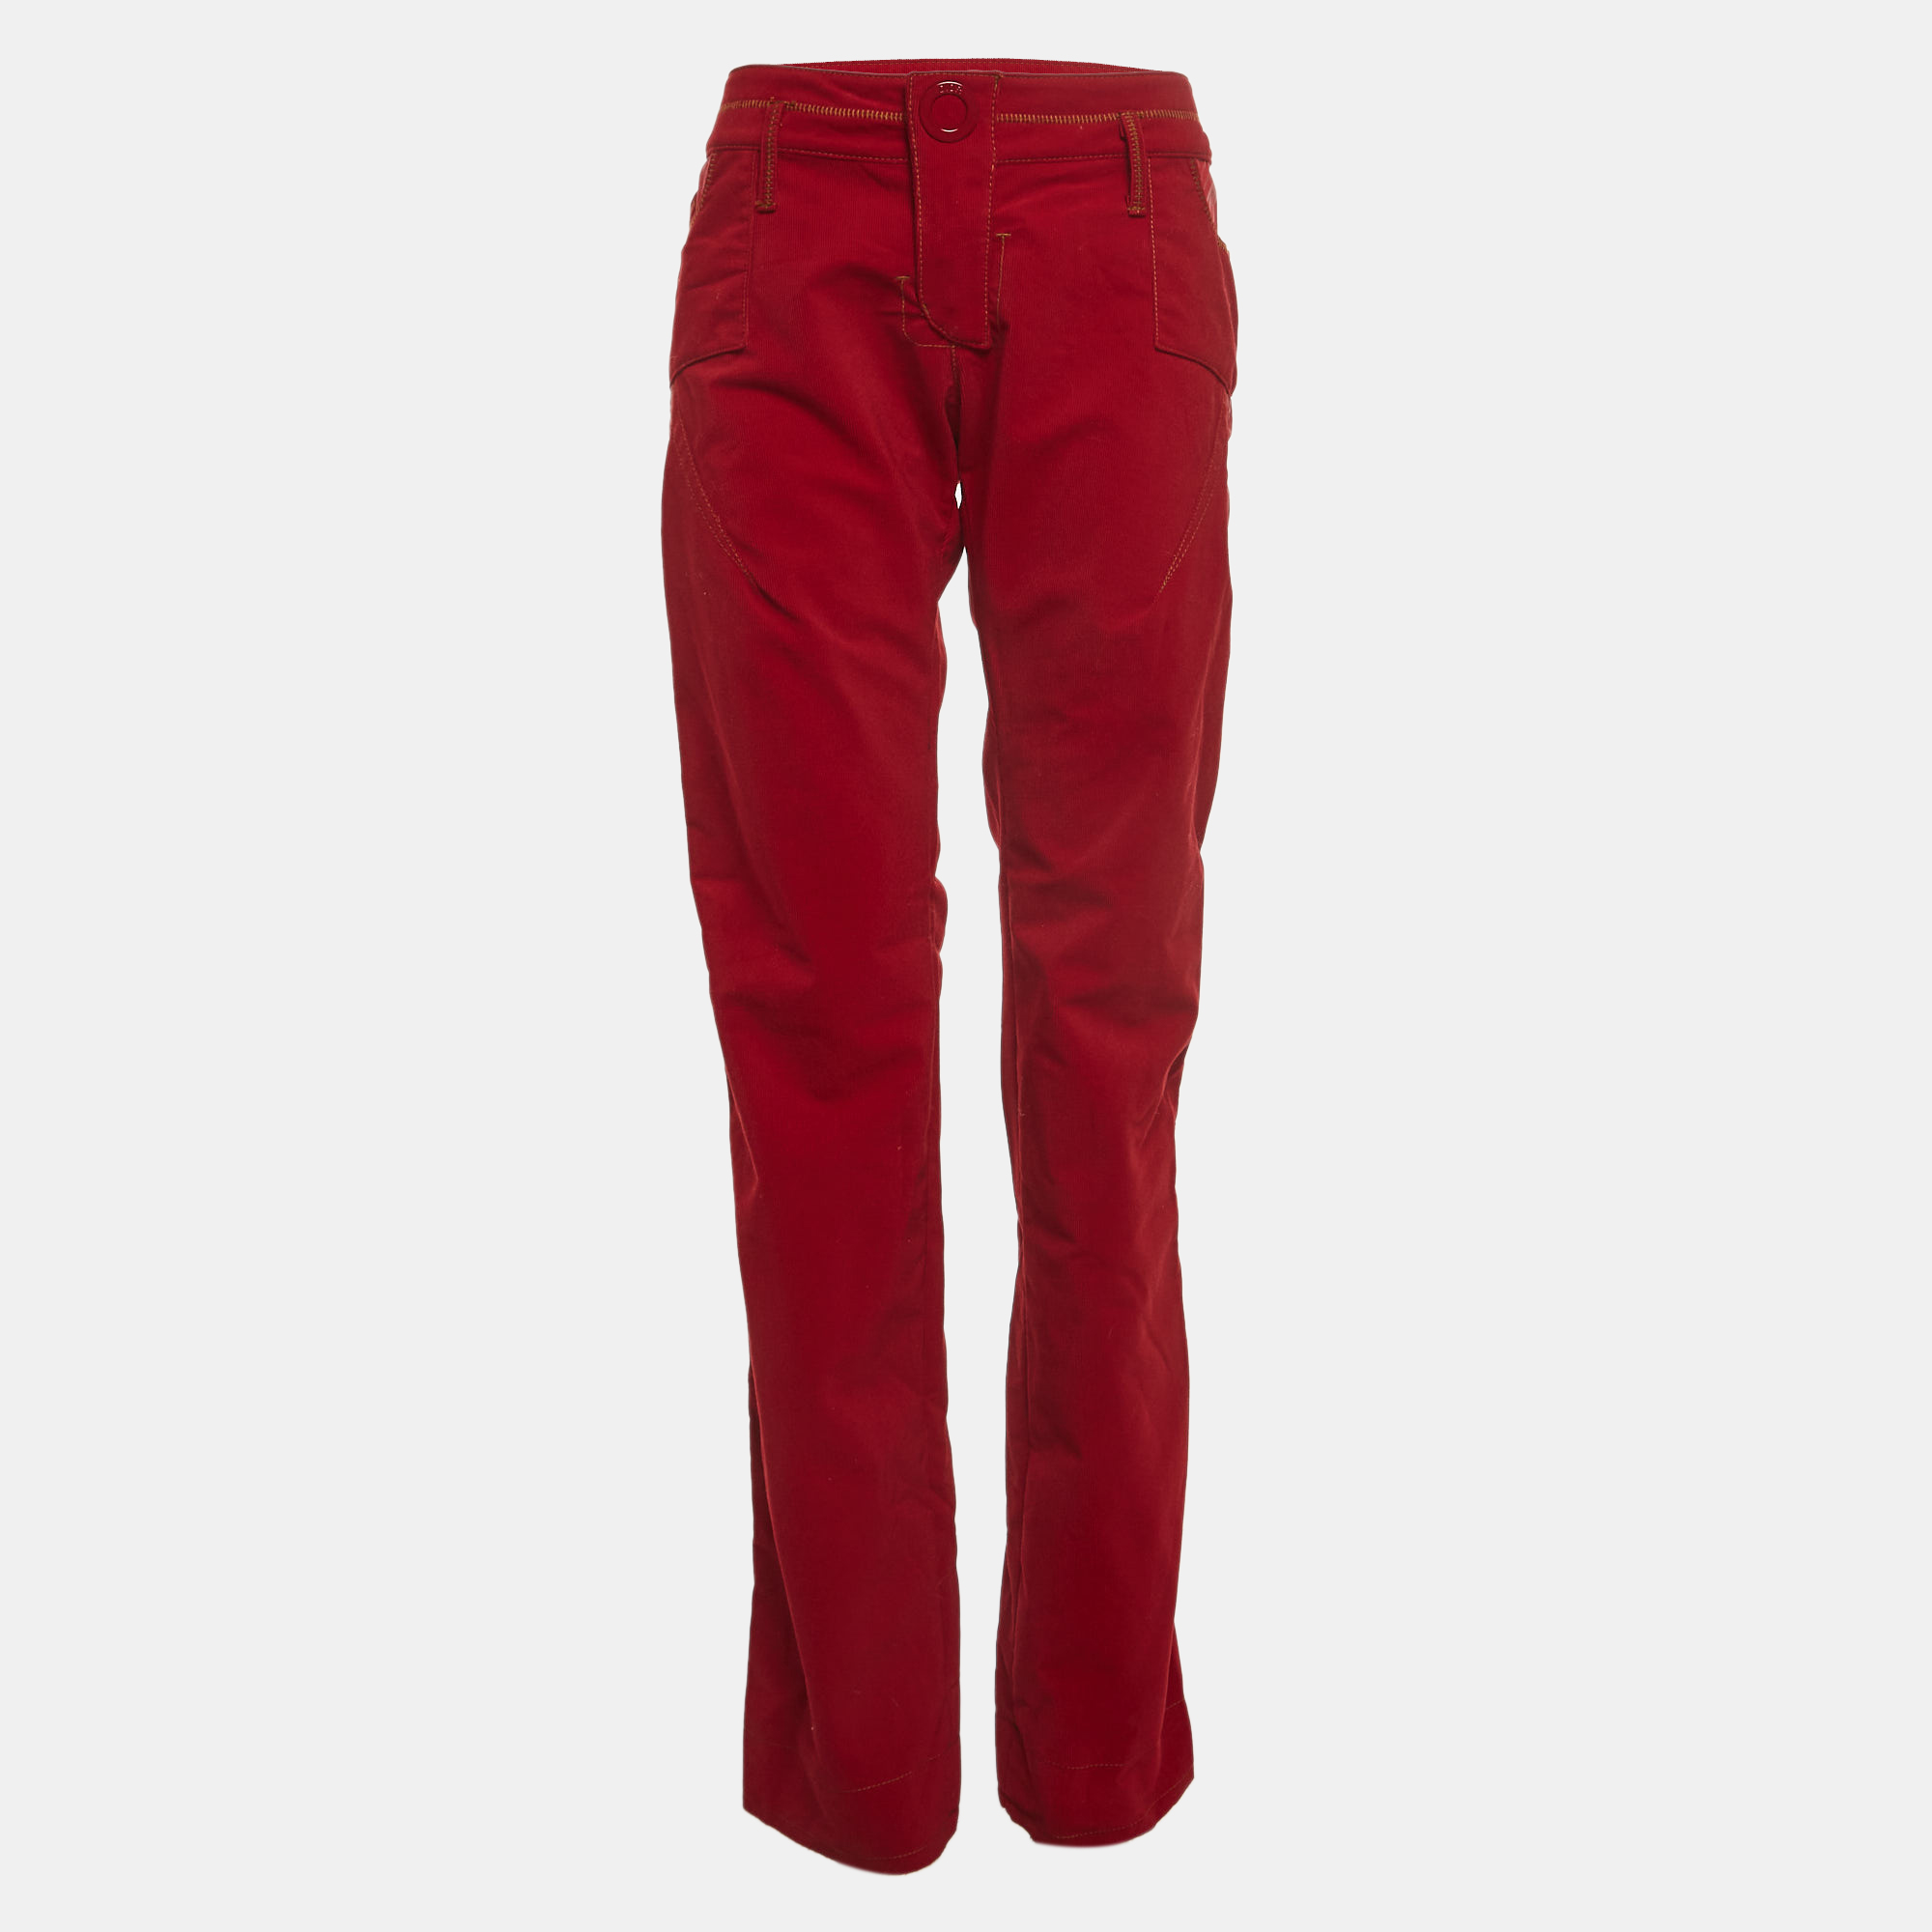 Christian dior boutique red corduroy zip detail straight pants m